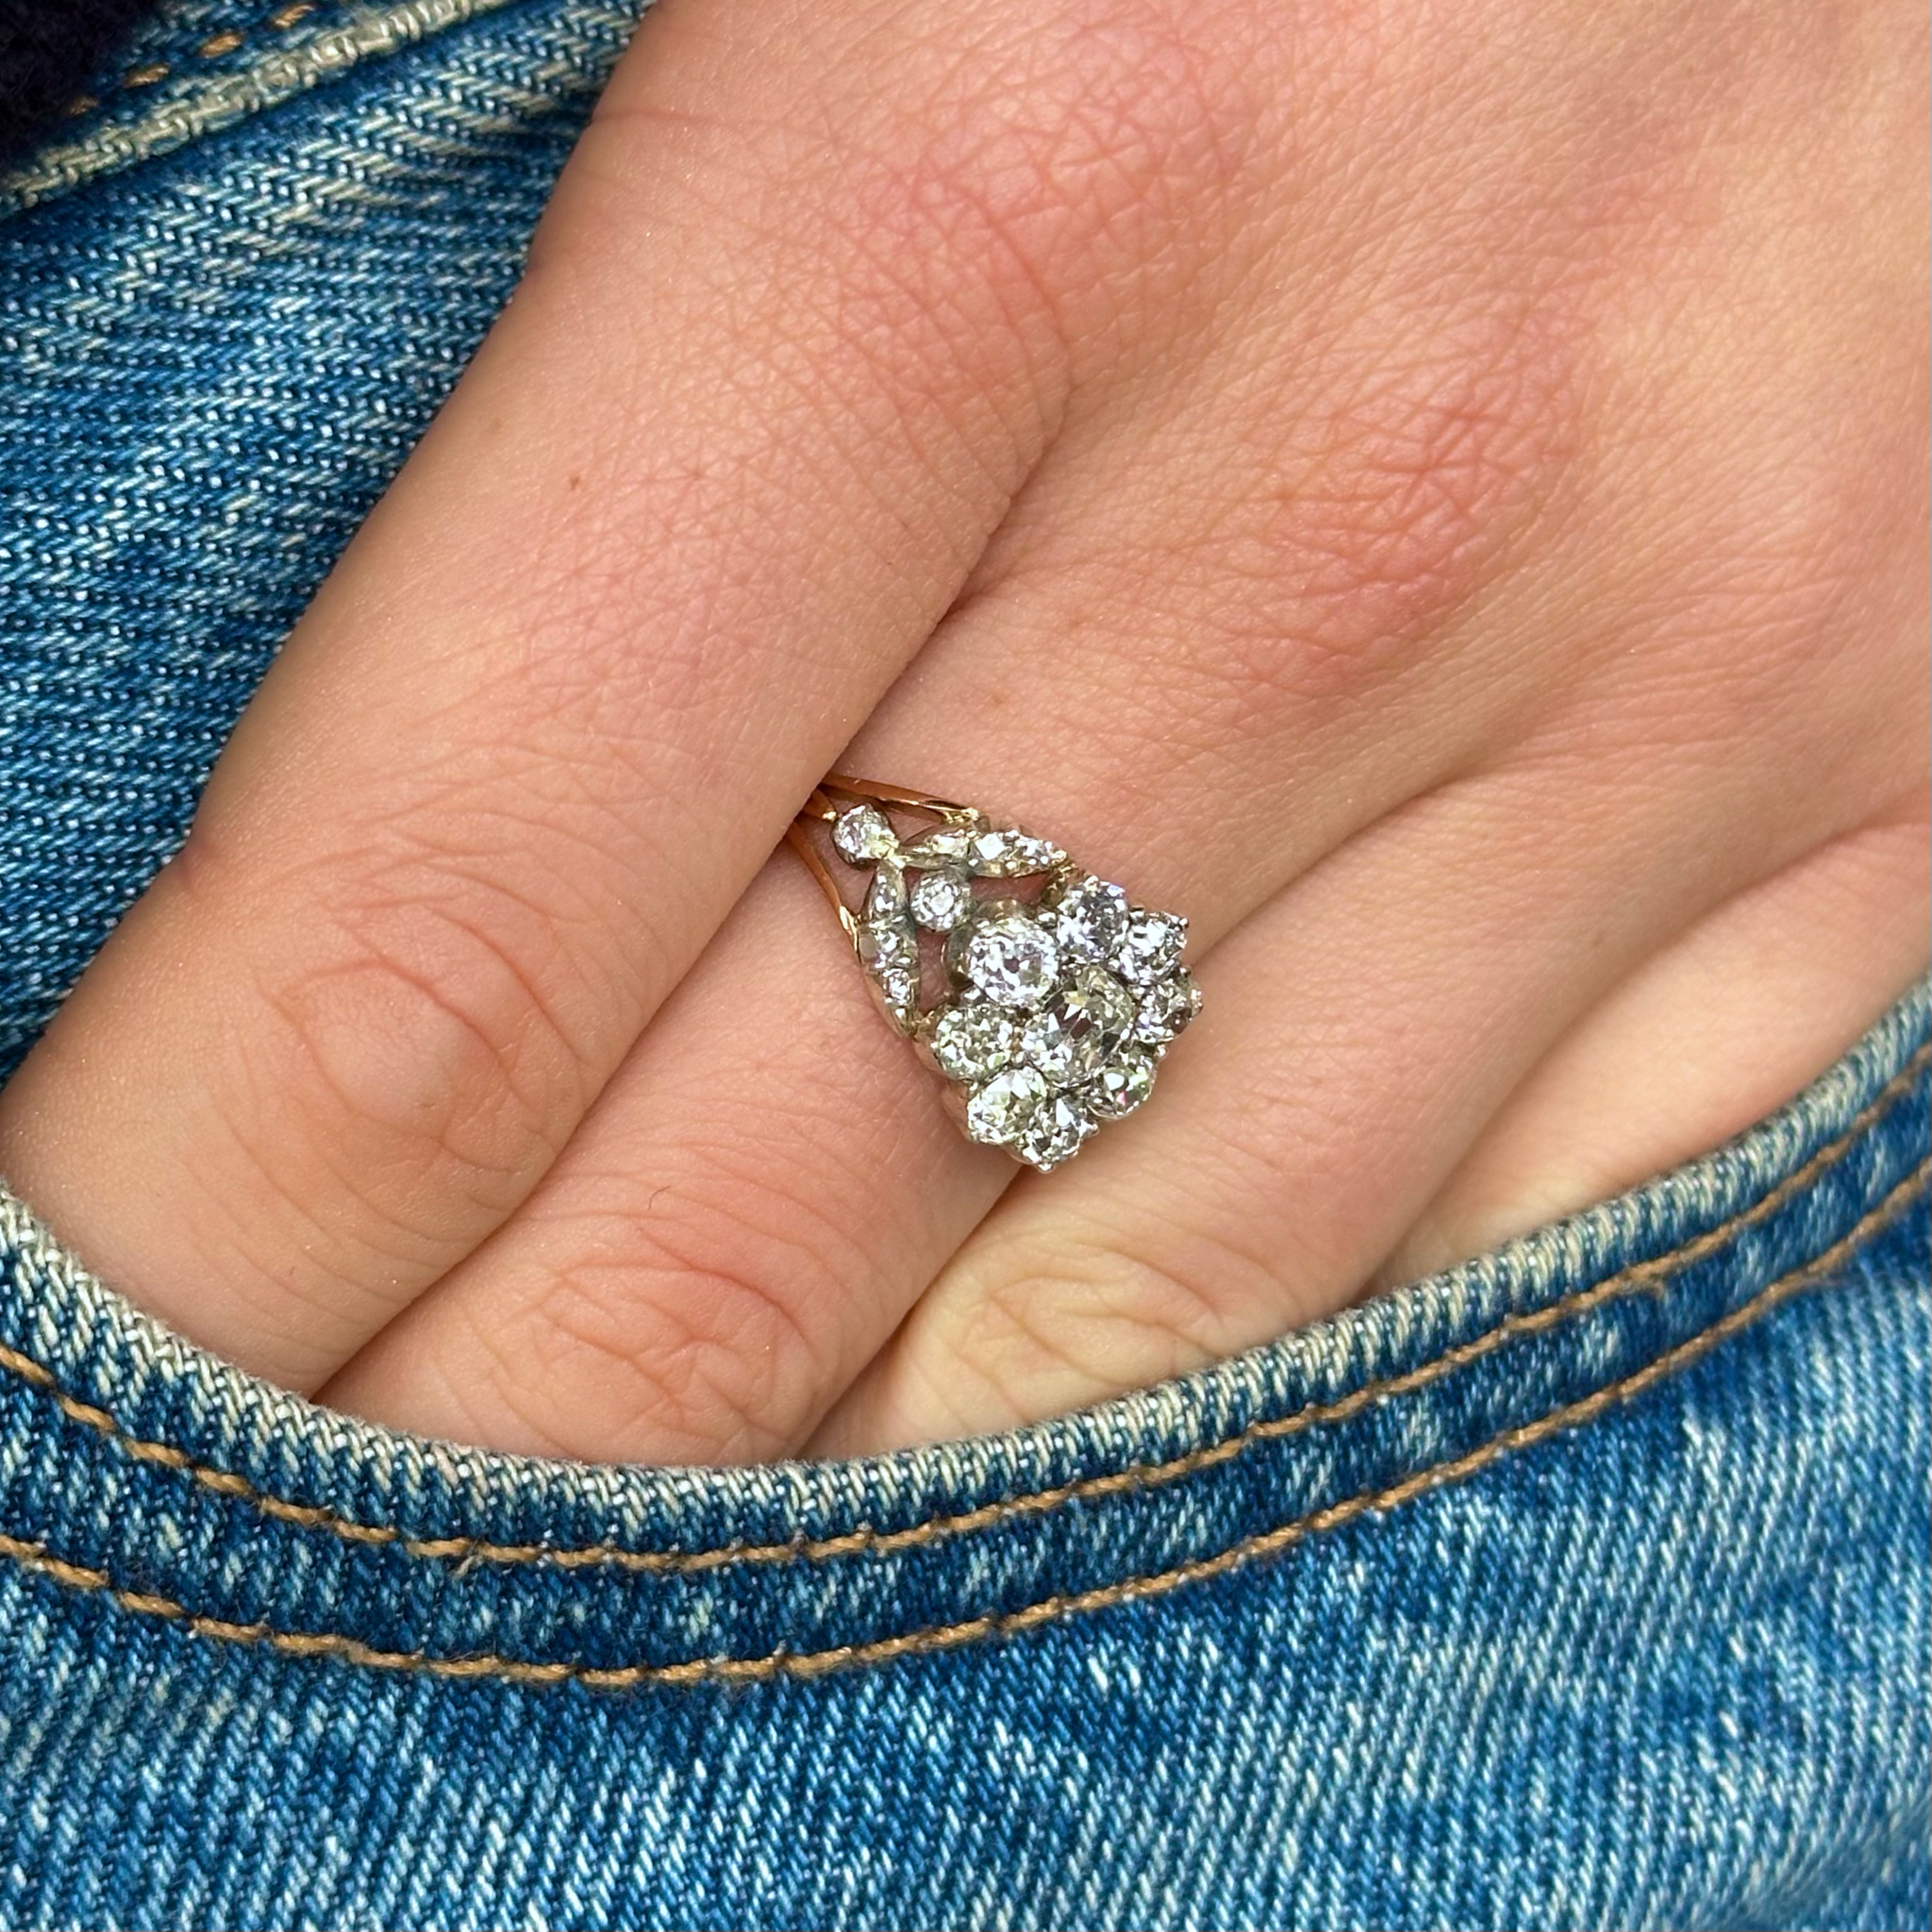 Antique, Georgian Diamond Cluster Ring, 18ct Yellow Gold worn on hand in pocket of jeans.